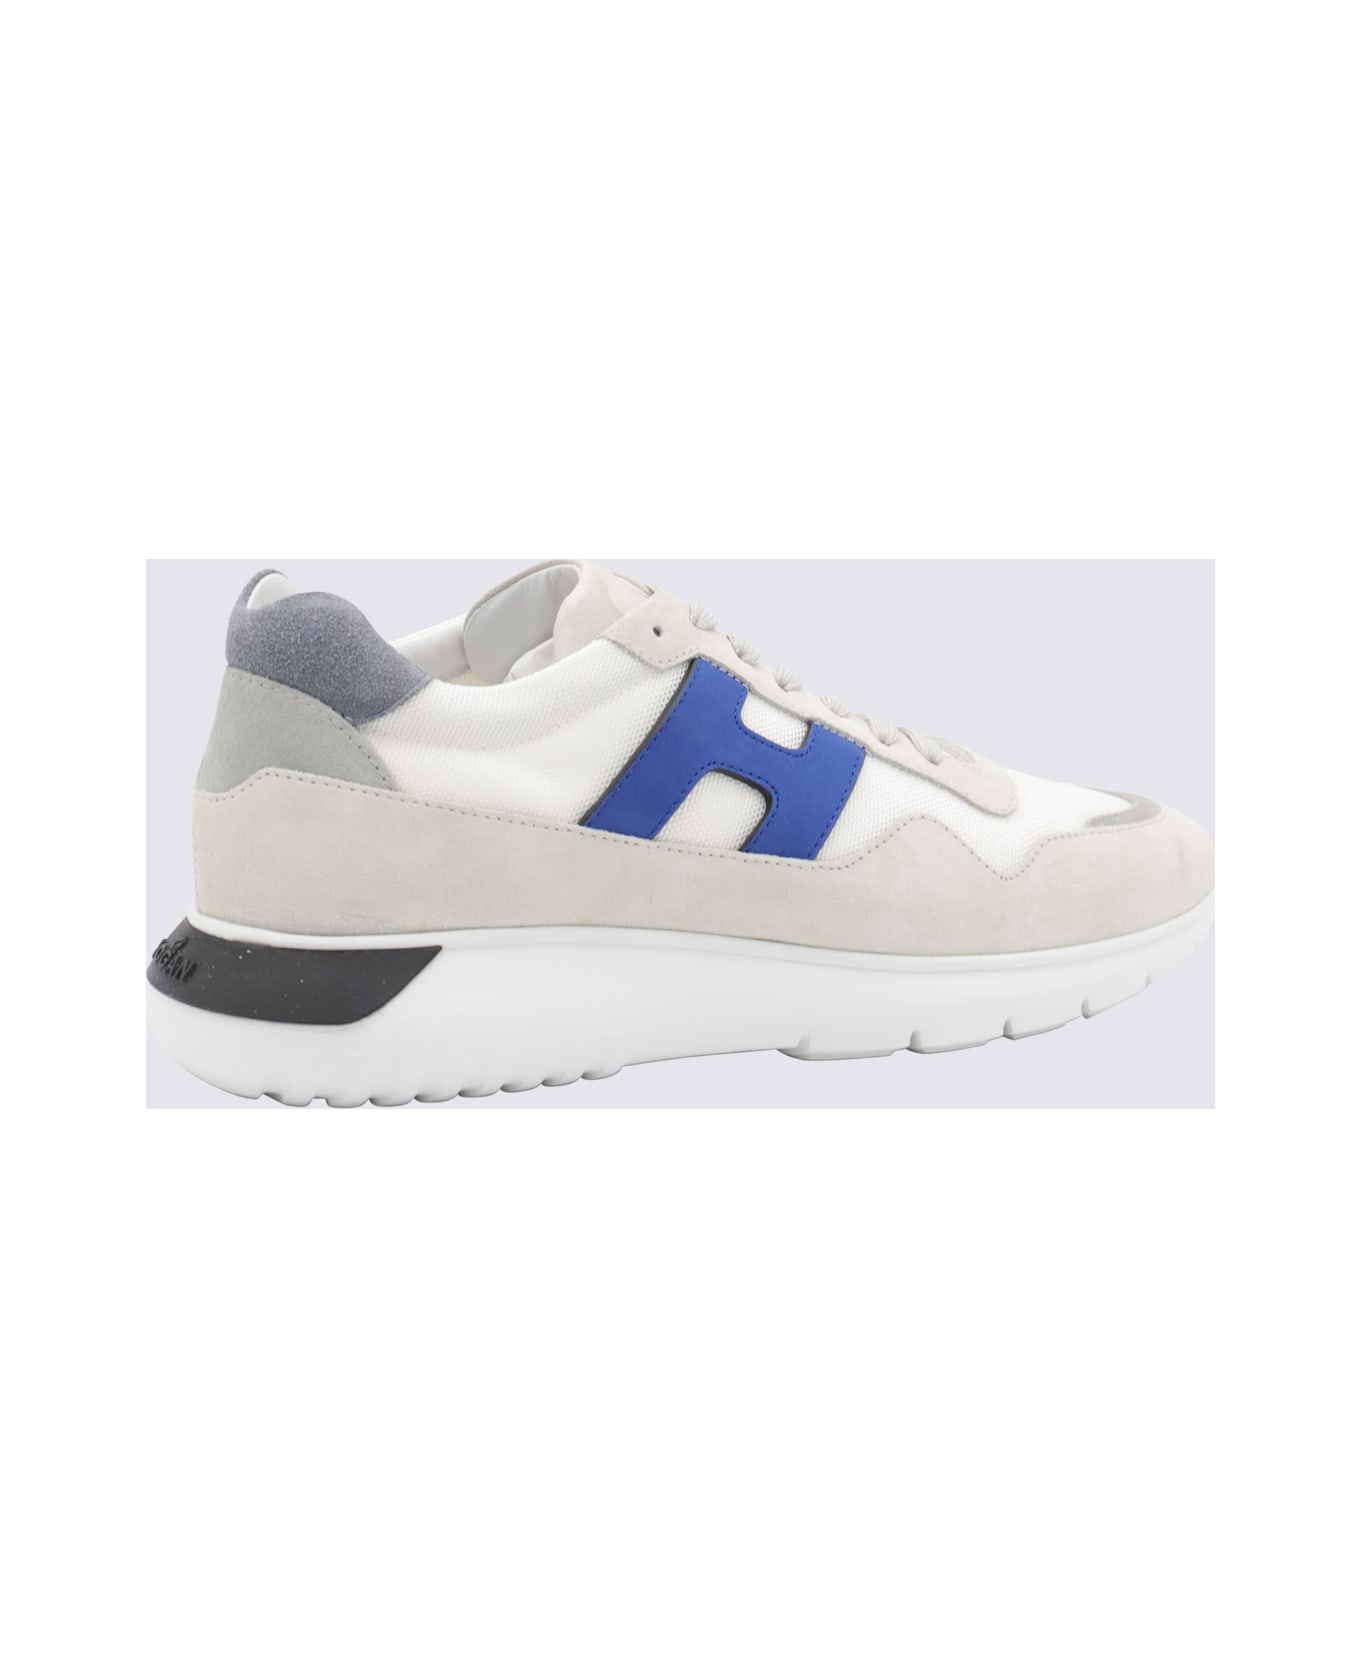 Hogan White Leather Sneakers - grey/blue